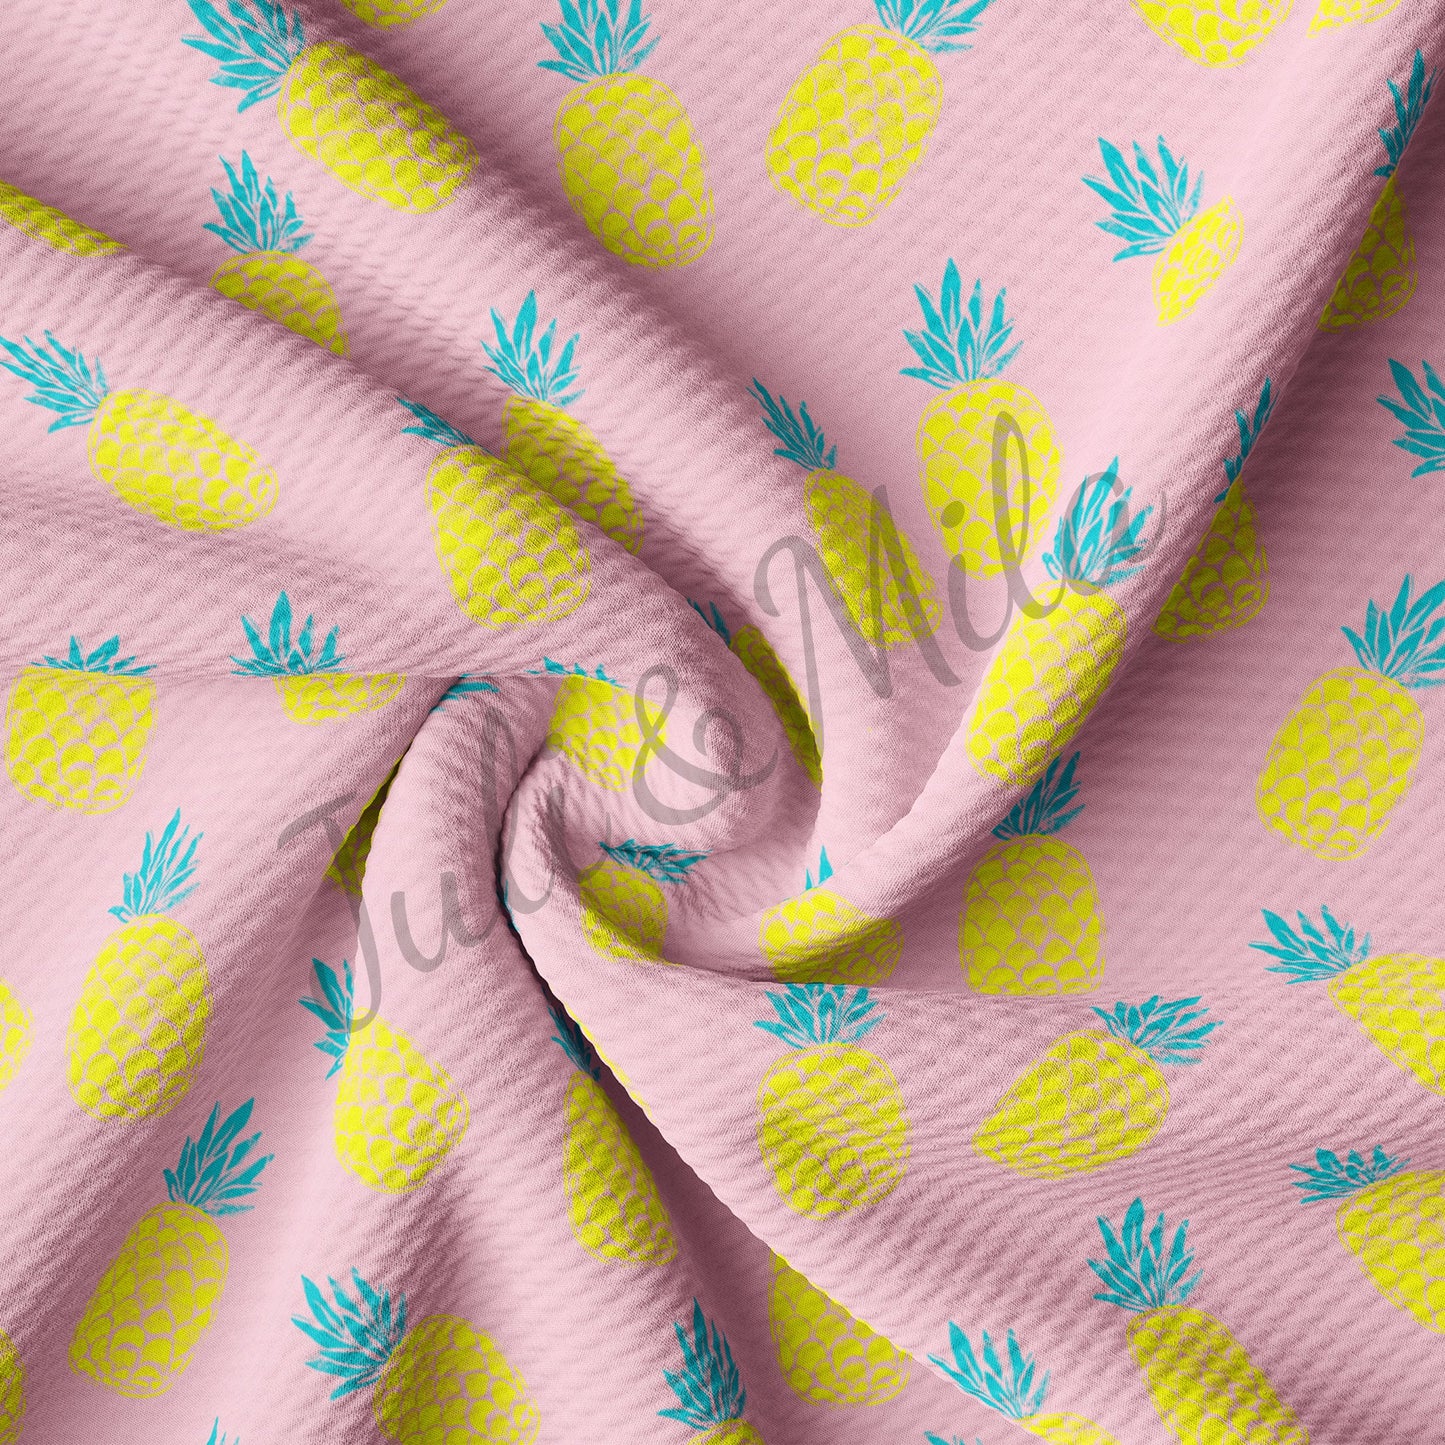 Pineapple l Bullet Textured Fabric  Pineapple